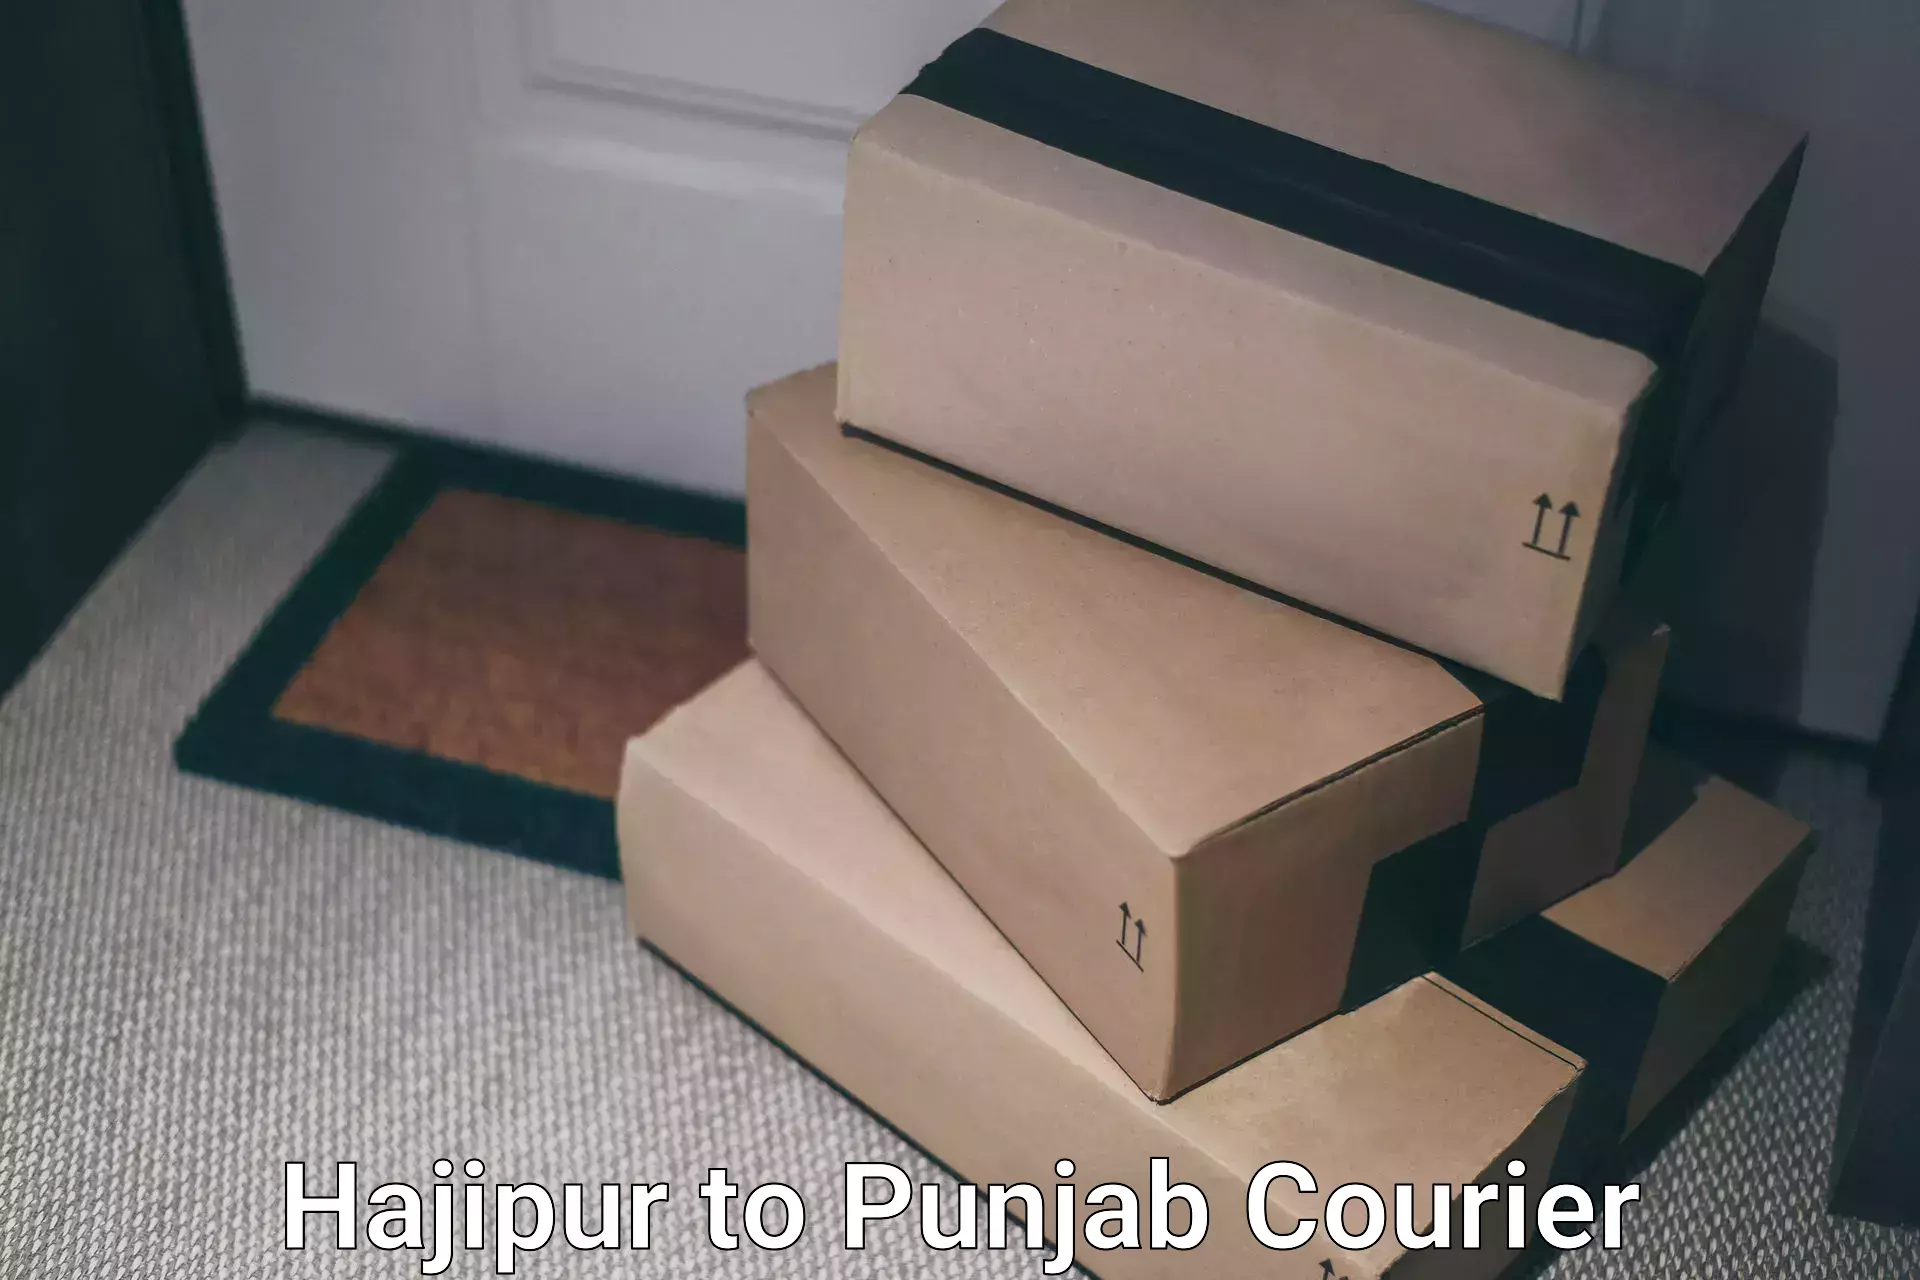 End-to-end delivery Hajipur to Anandpur Sahib